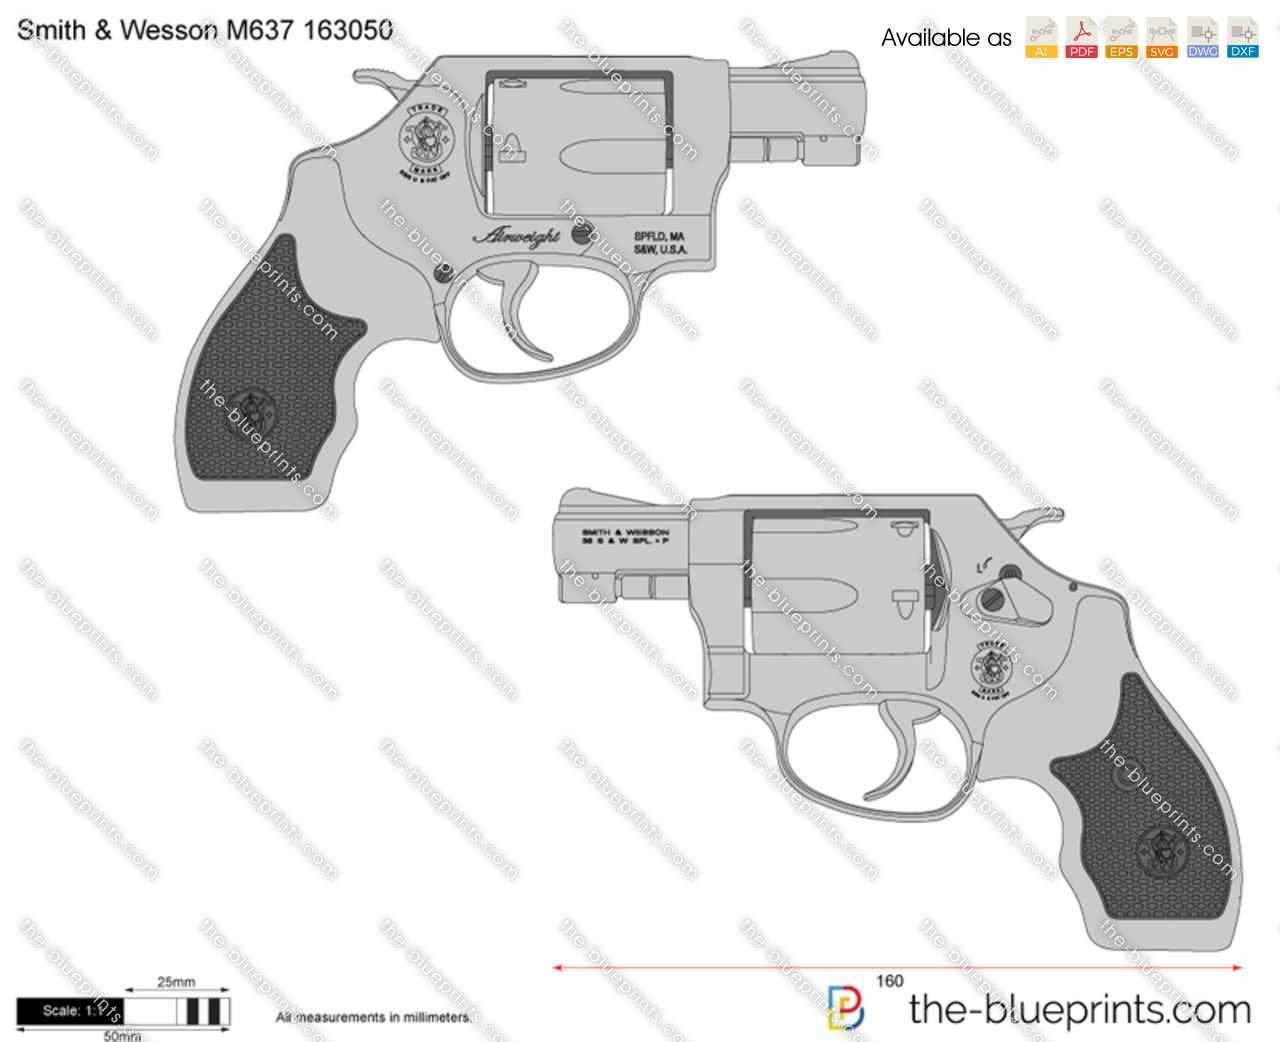 Smith & Wesson M637 163050